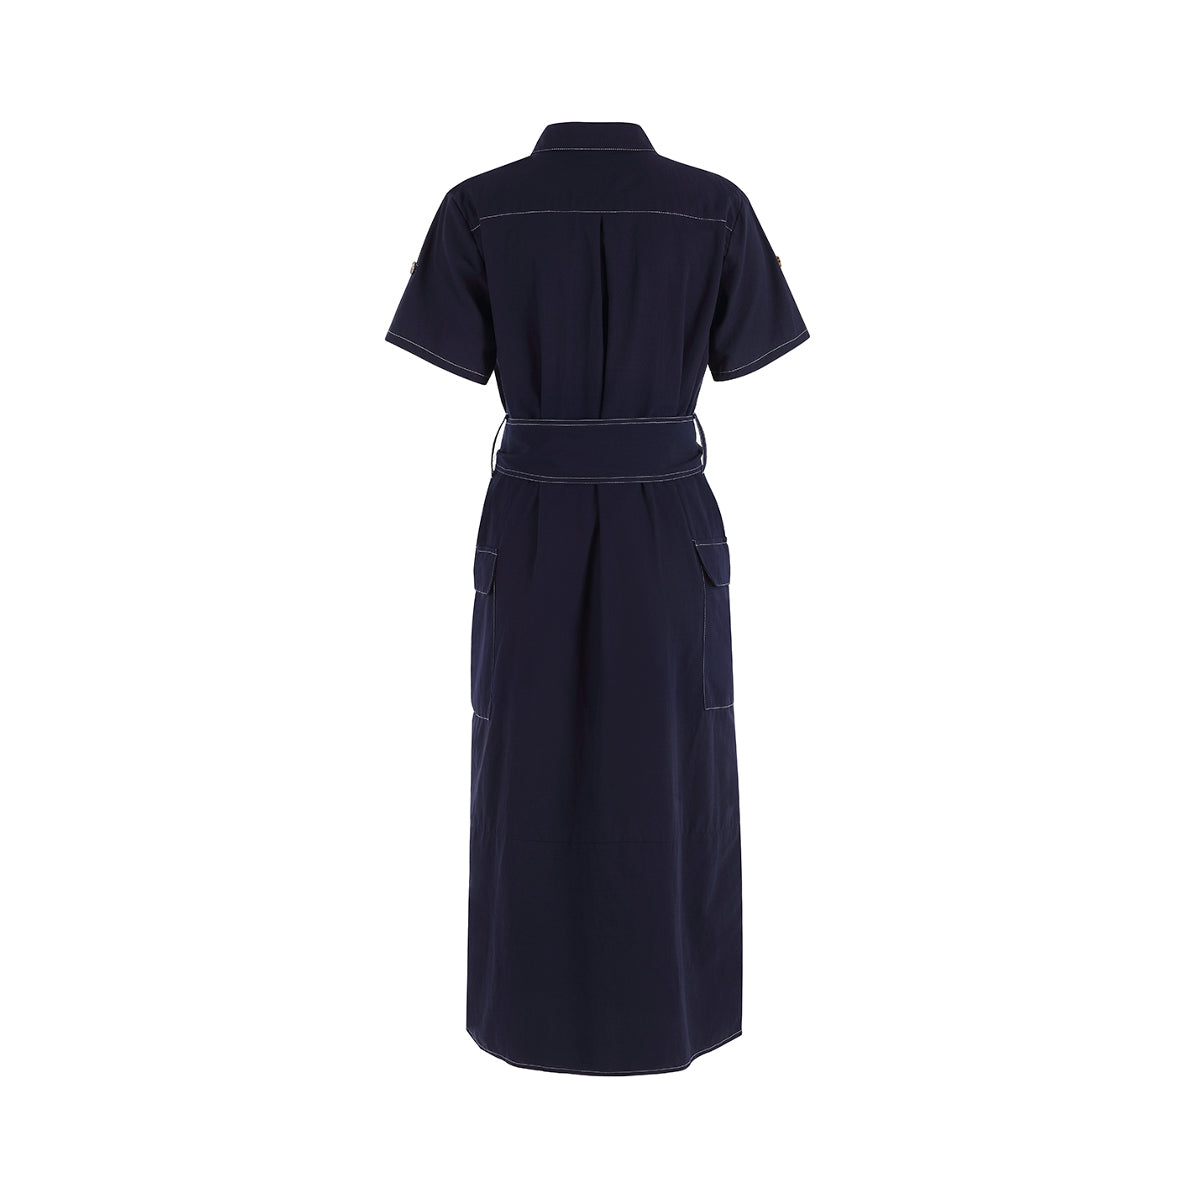 The Whitney Dress in Navy